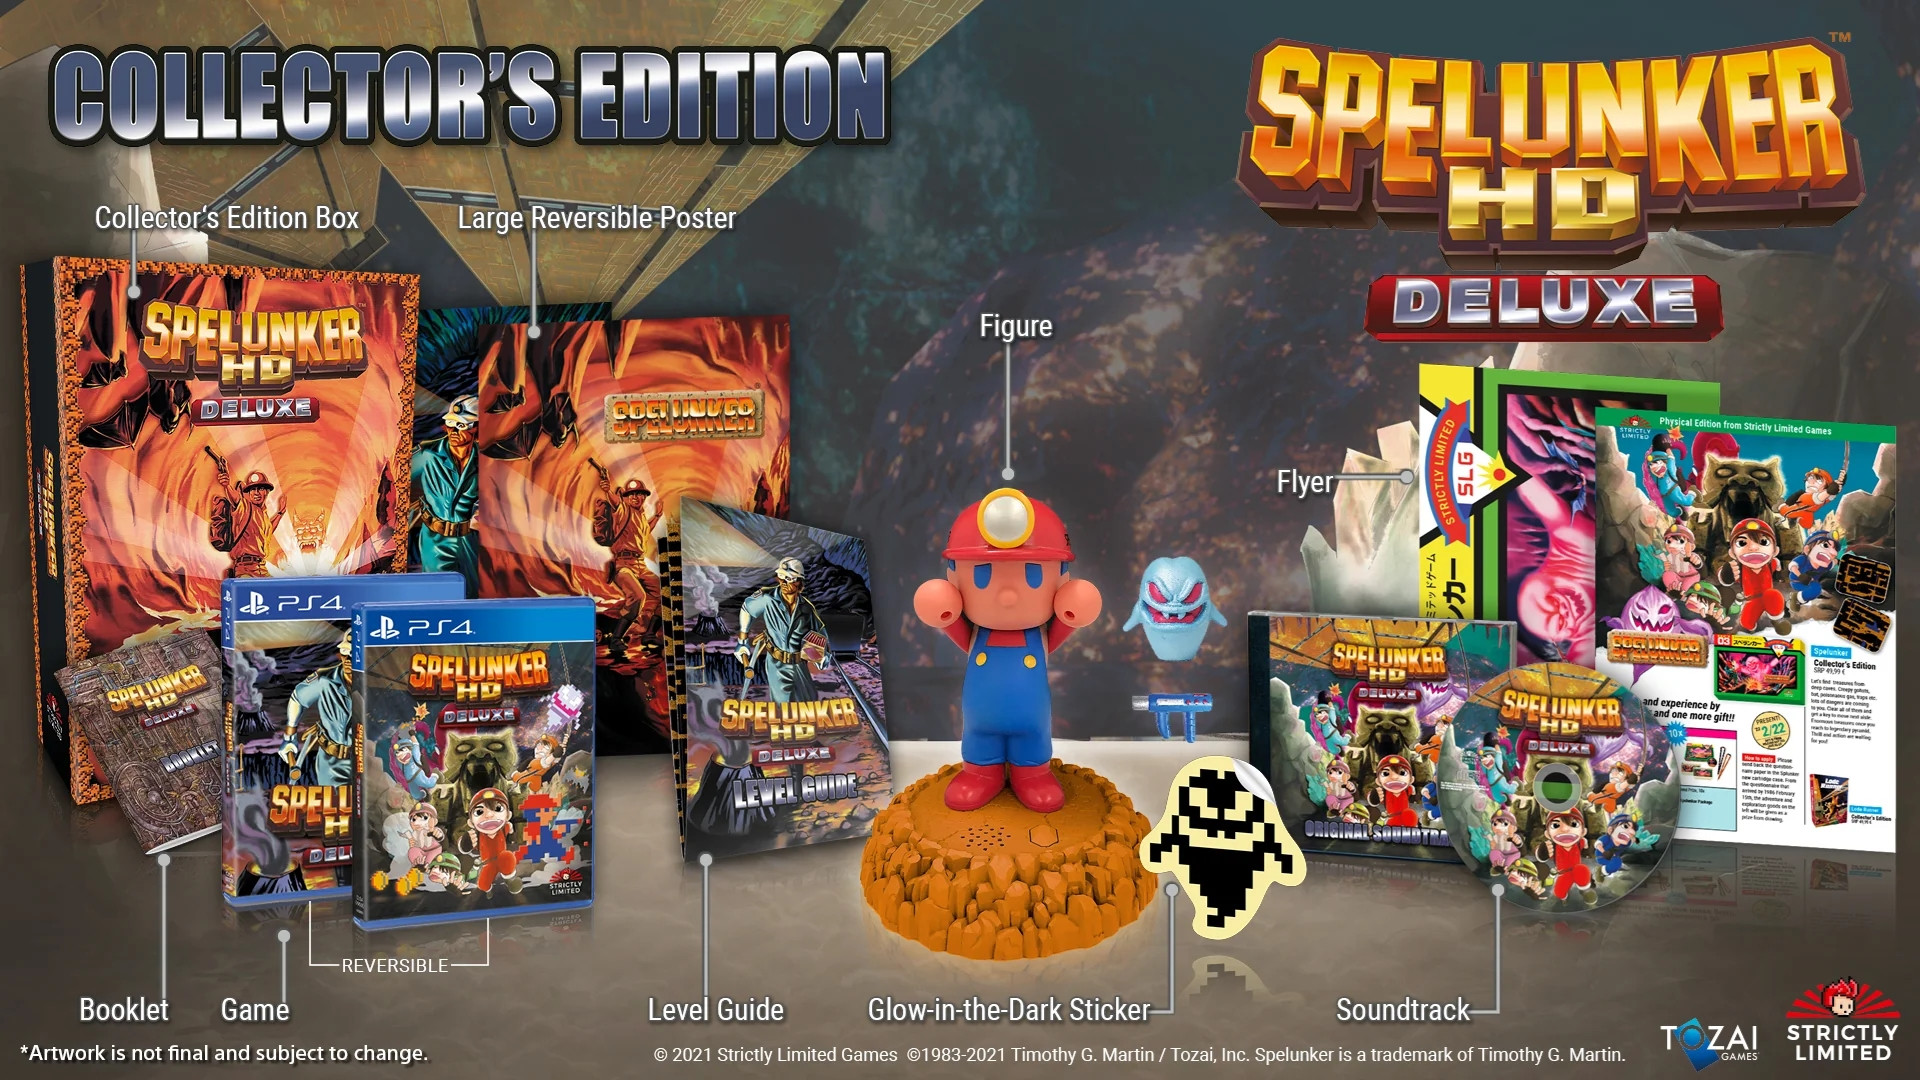 Spelunker HD Deluxe - Collector's Edition (Strictly Limited) (PS4), Tozai Games